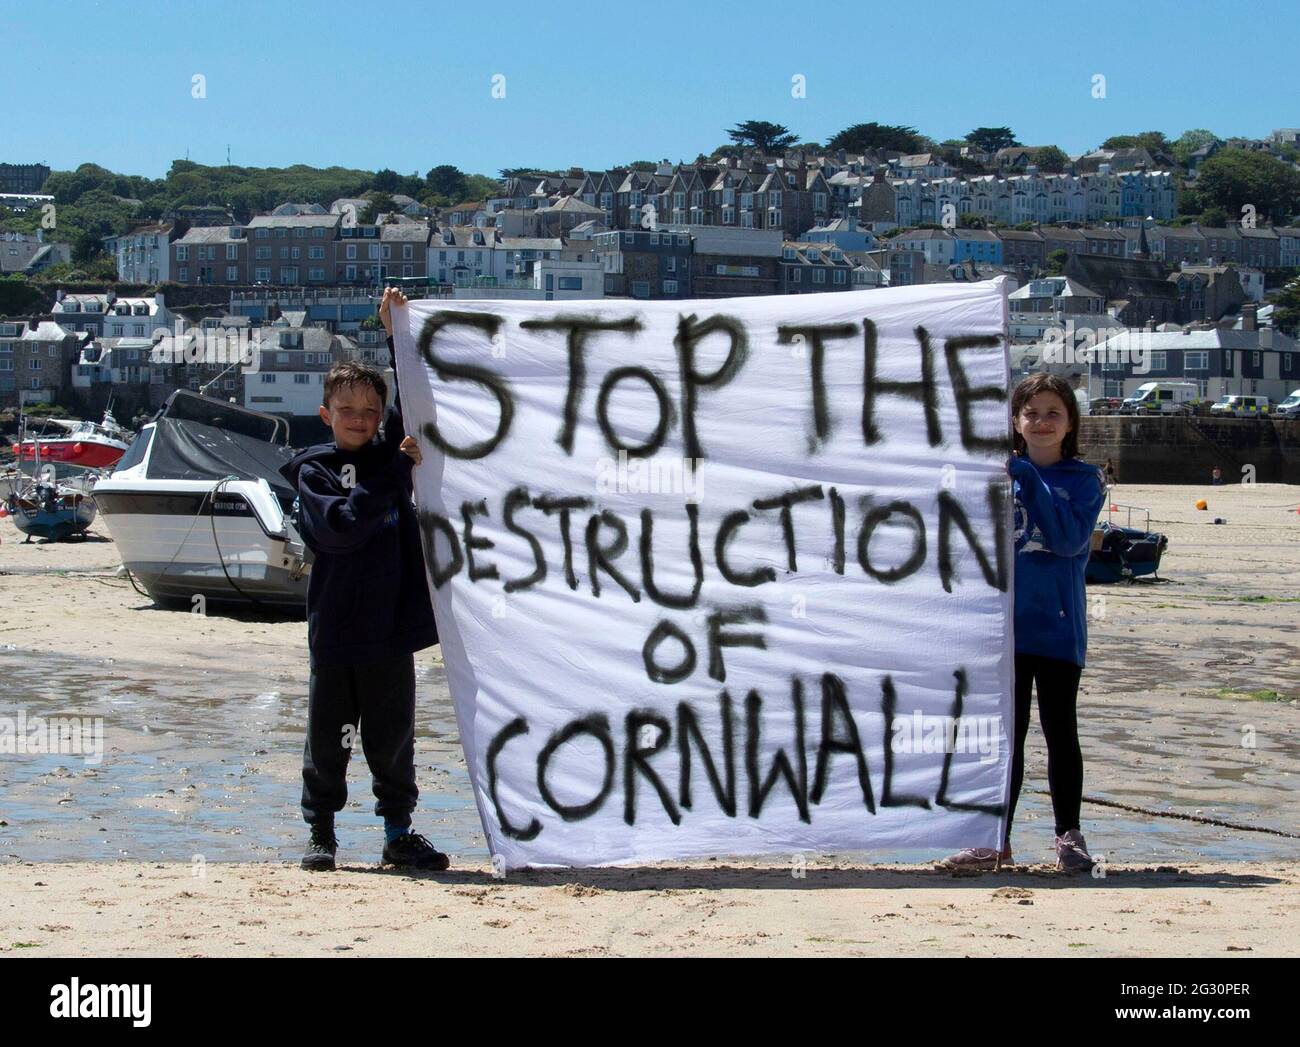 St Ives, Cornwall, UK. 13th June, 2021. Two young members of Extinction Rebellion hold a banner in front of St Ives harbour, close to Carbis Bay Hotel which is hosting the G7 summit. 13th June 2021. Anna Hatfield/ Pathos Credit: One Up Top Editorial Images/Alamy Live News Stock Photo